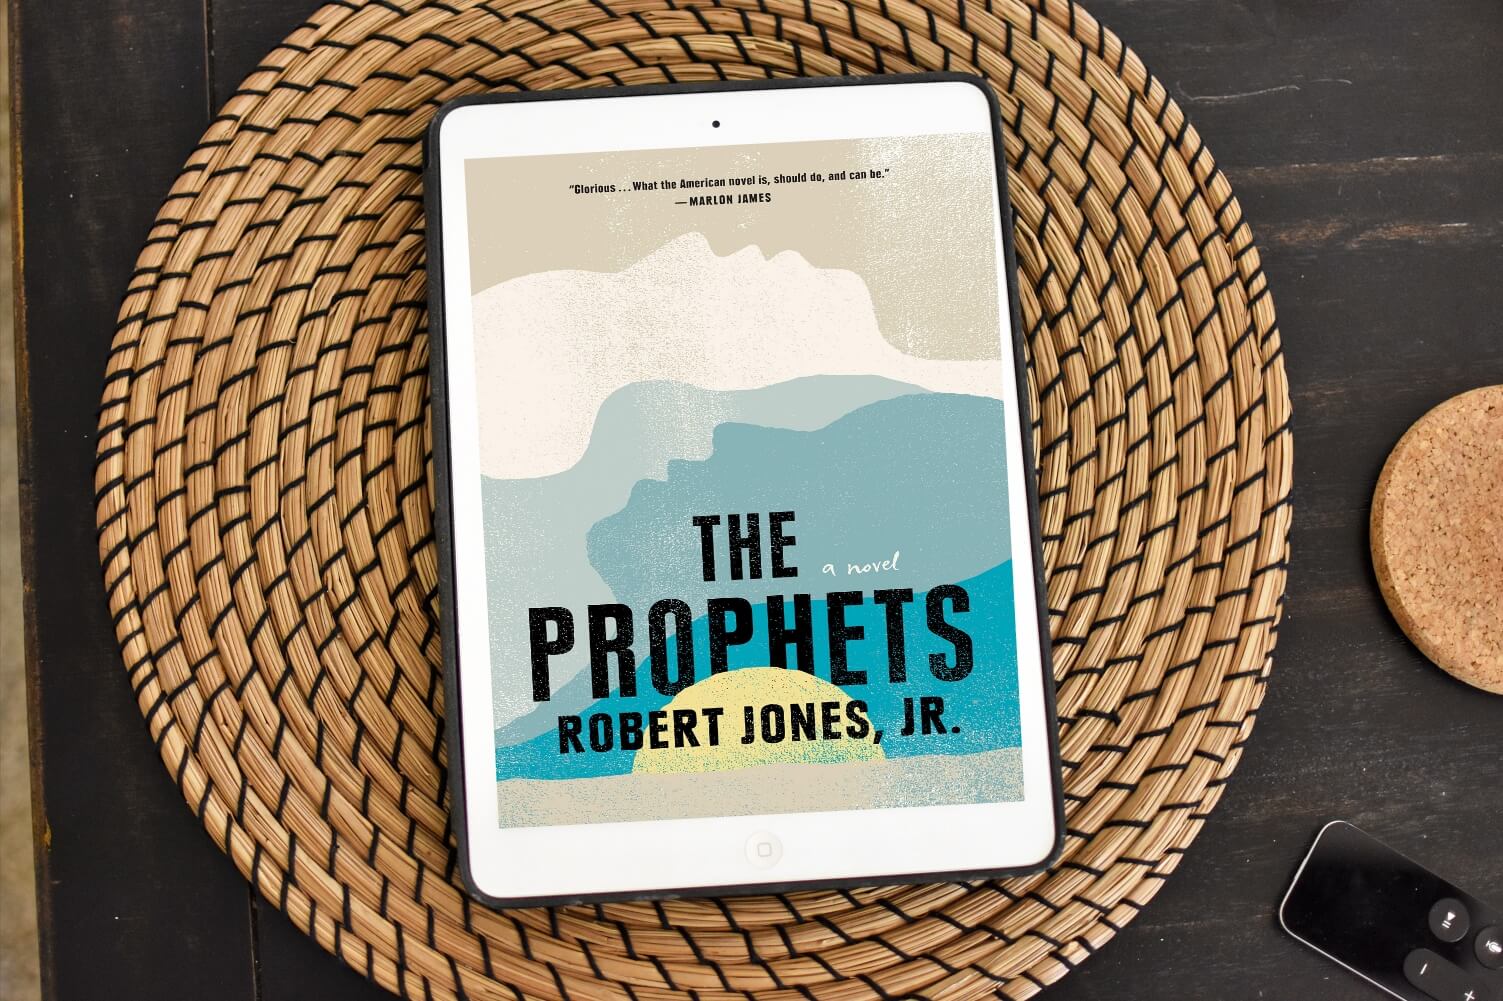 Book Club Questions for The Prophets by Robert Jones, Jr.